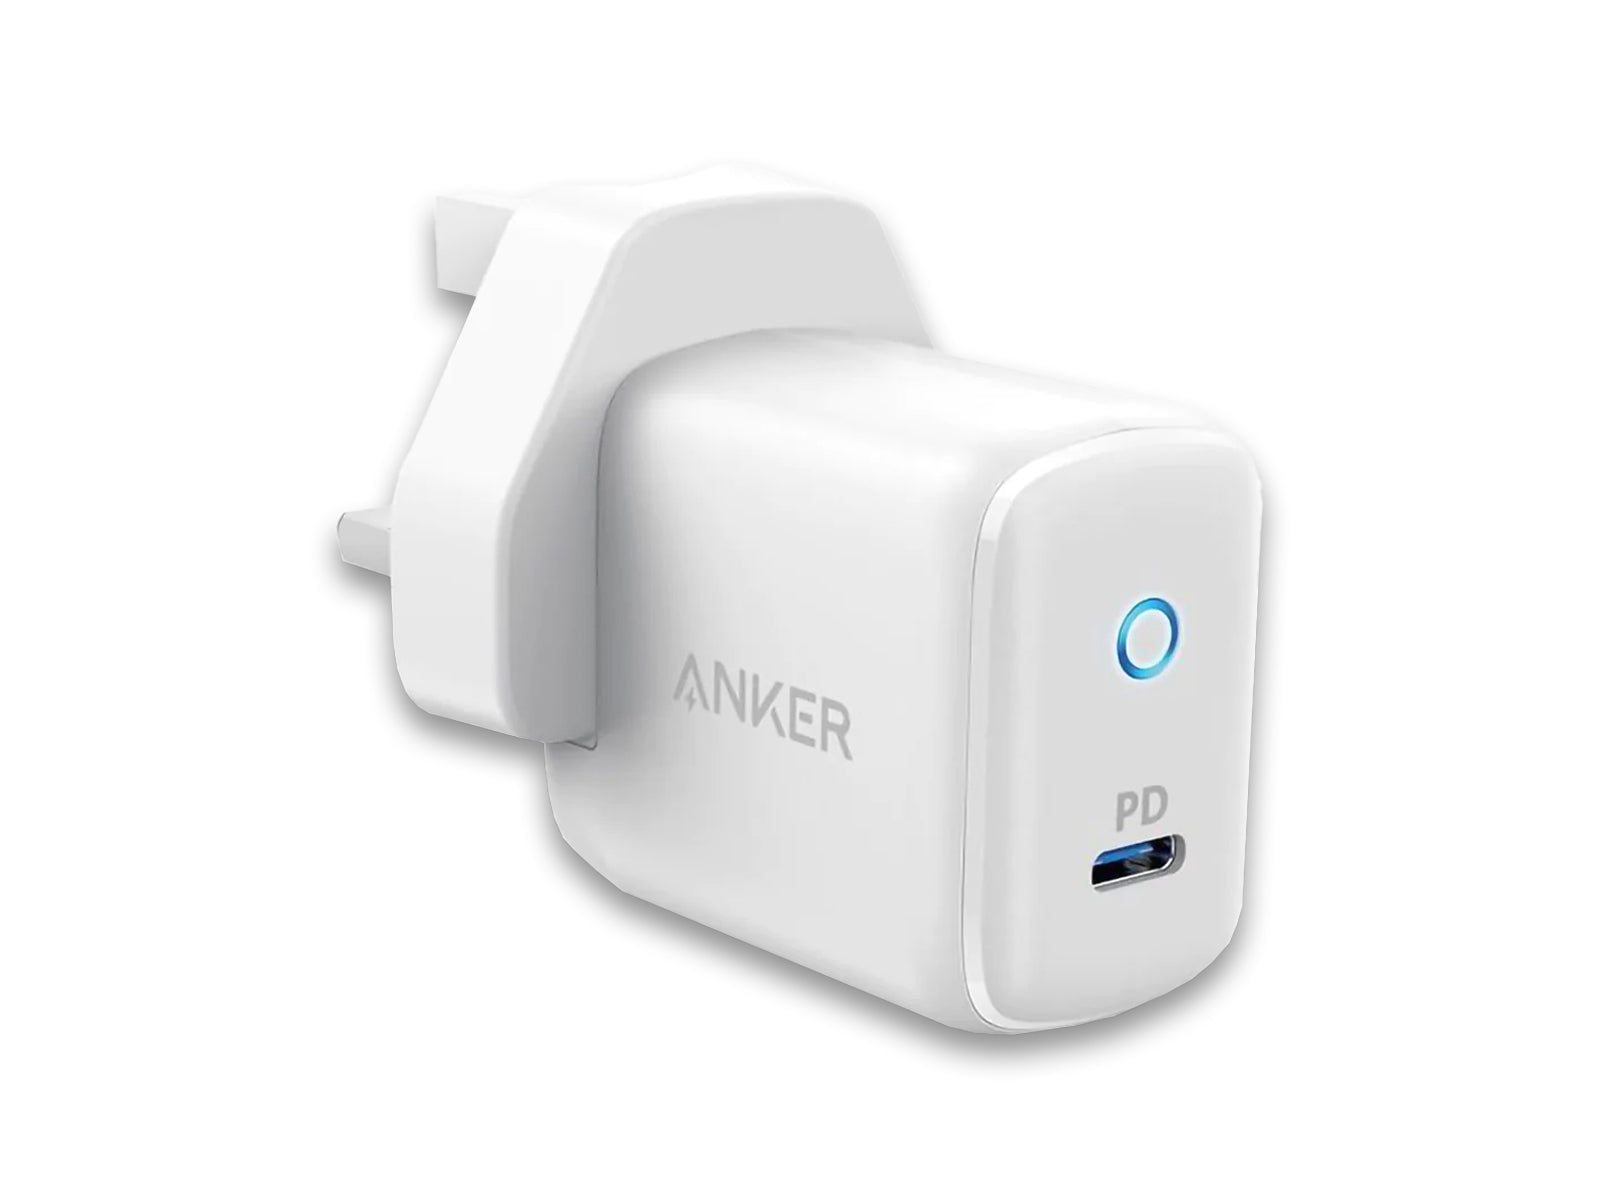 Image shows a front view of the Anker PowerPort PD USB-C 18W Fast Charger White